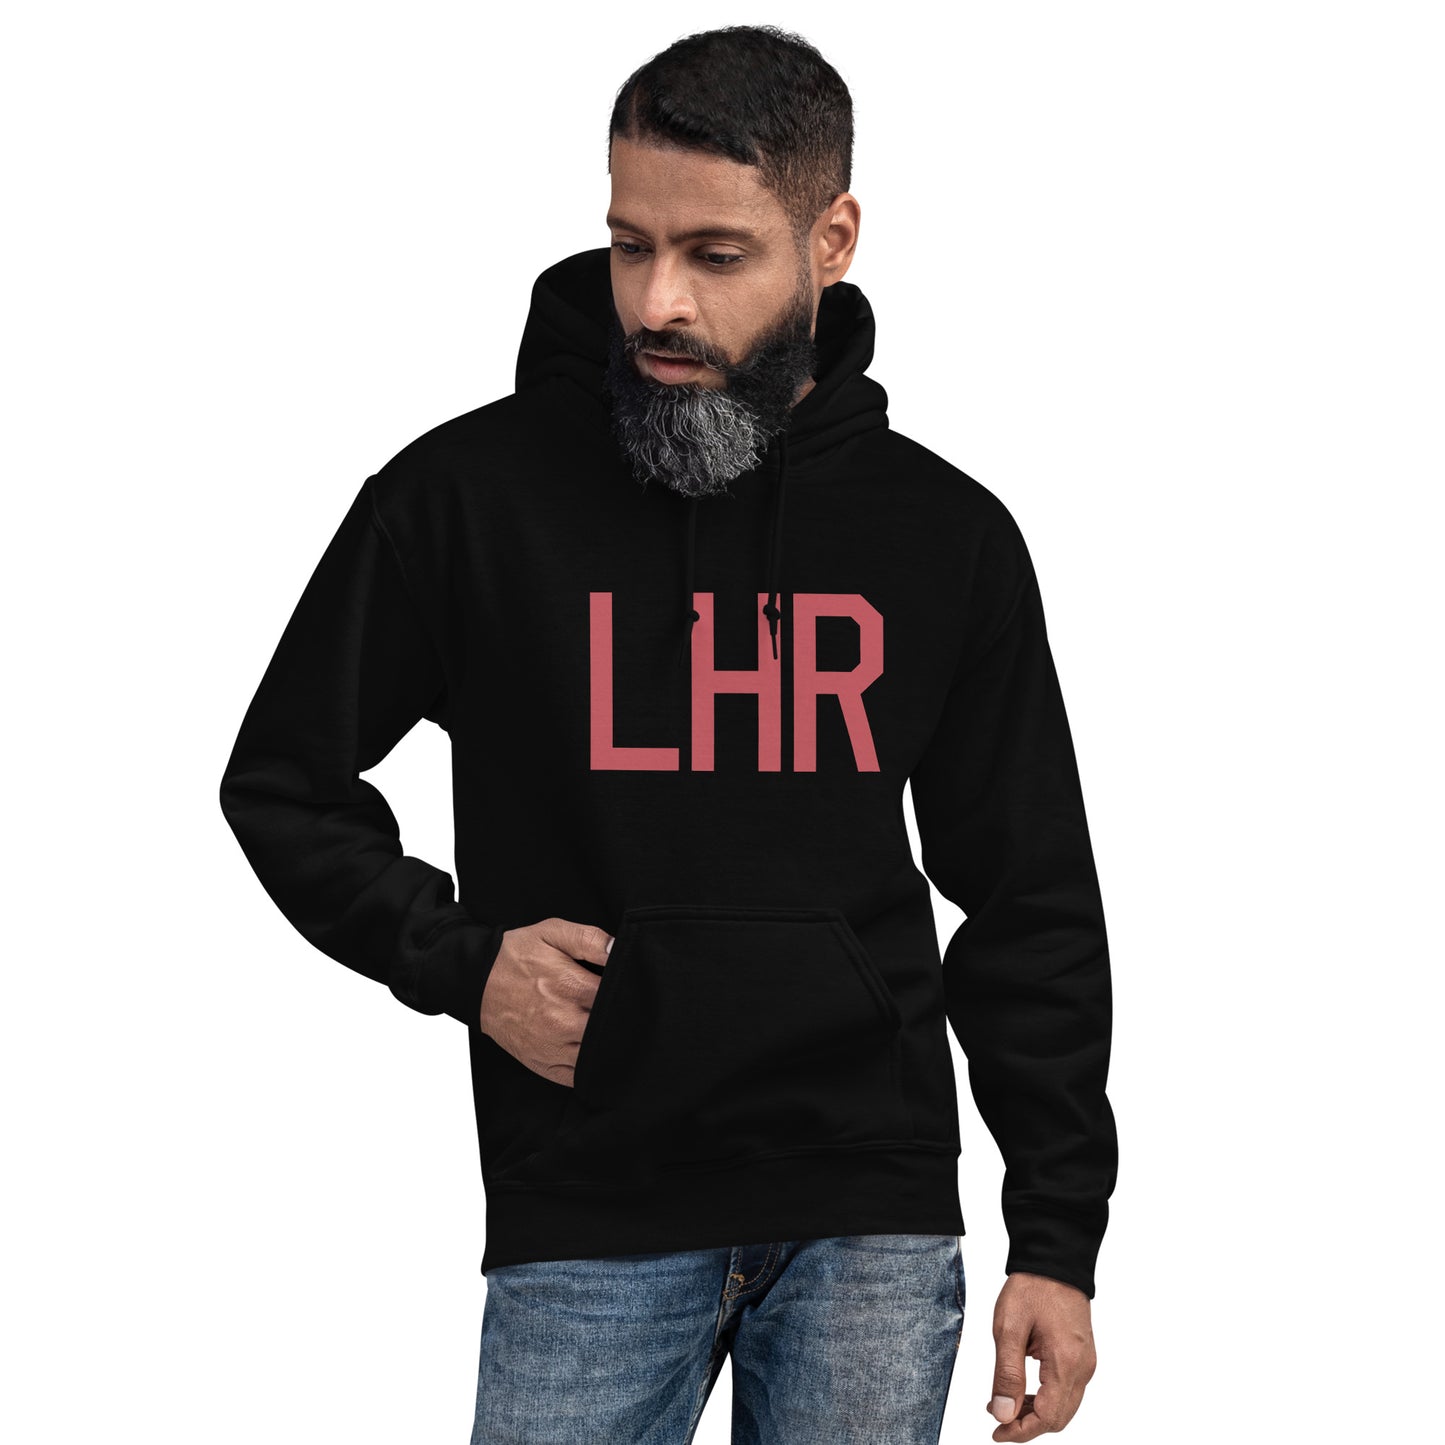 Aviation Enthusiast Hoodie - Deep Pink Graphic • LHR London • YHM Designs - Image 05